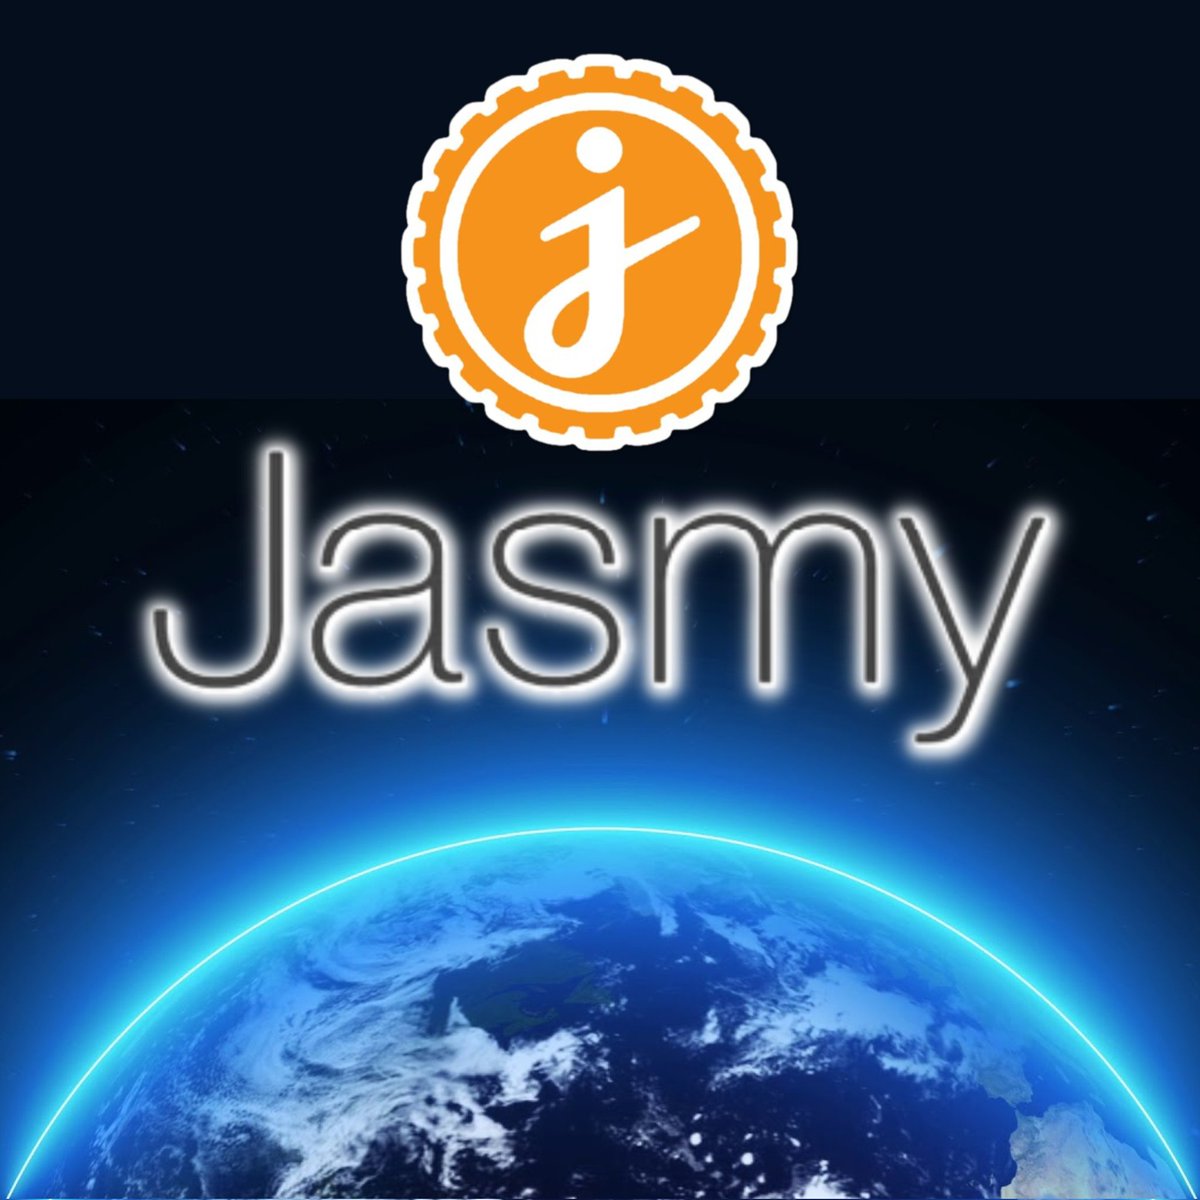 The #Jasmy Smart Guardian is a device that helps businesses secure their IoT devices. The device uses blockchain technology to encrypt data & prevent unauthorized access. The Smart Guardian can also be used to monitor IoT devices for signs of hacking.
This in itself will be big!